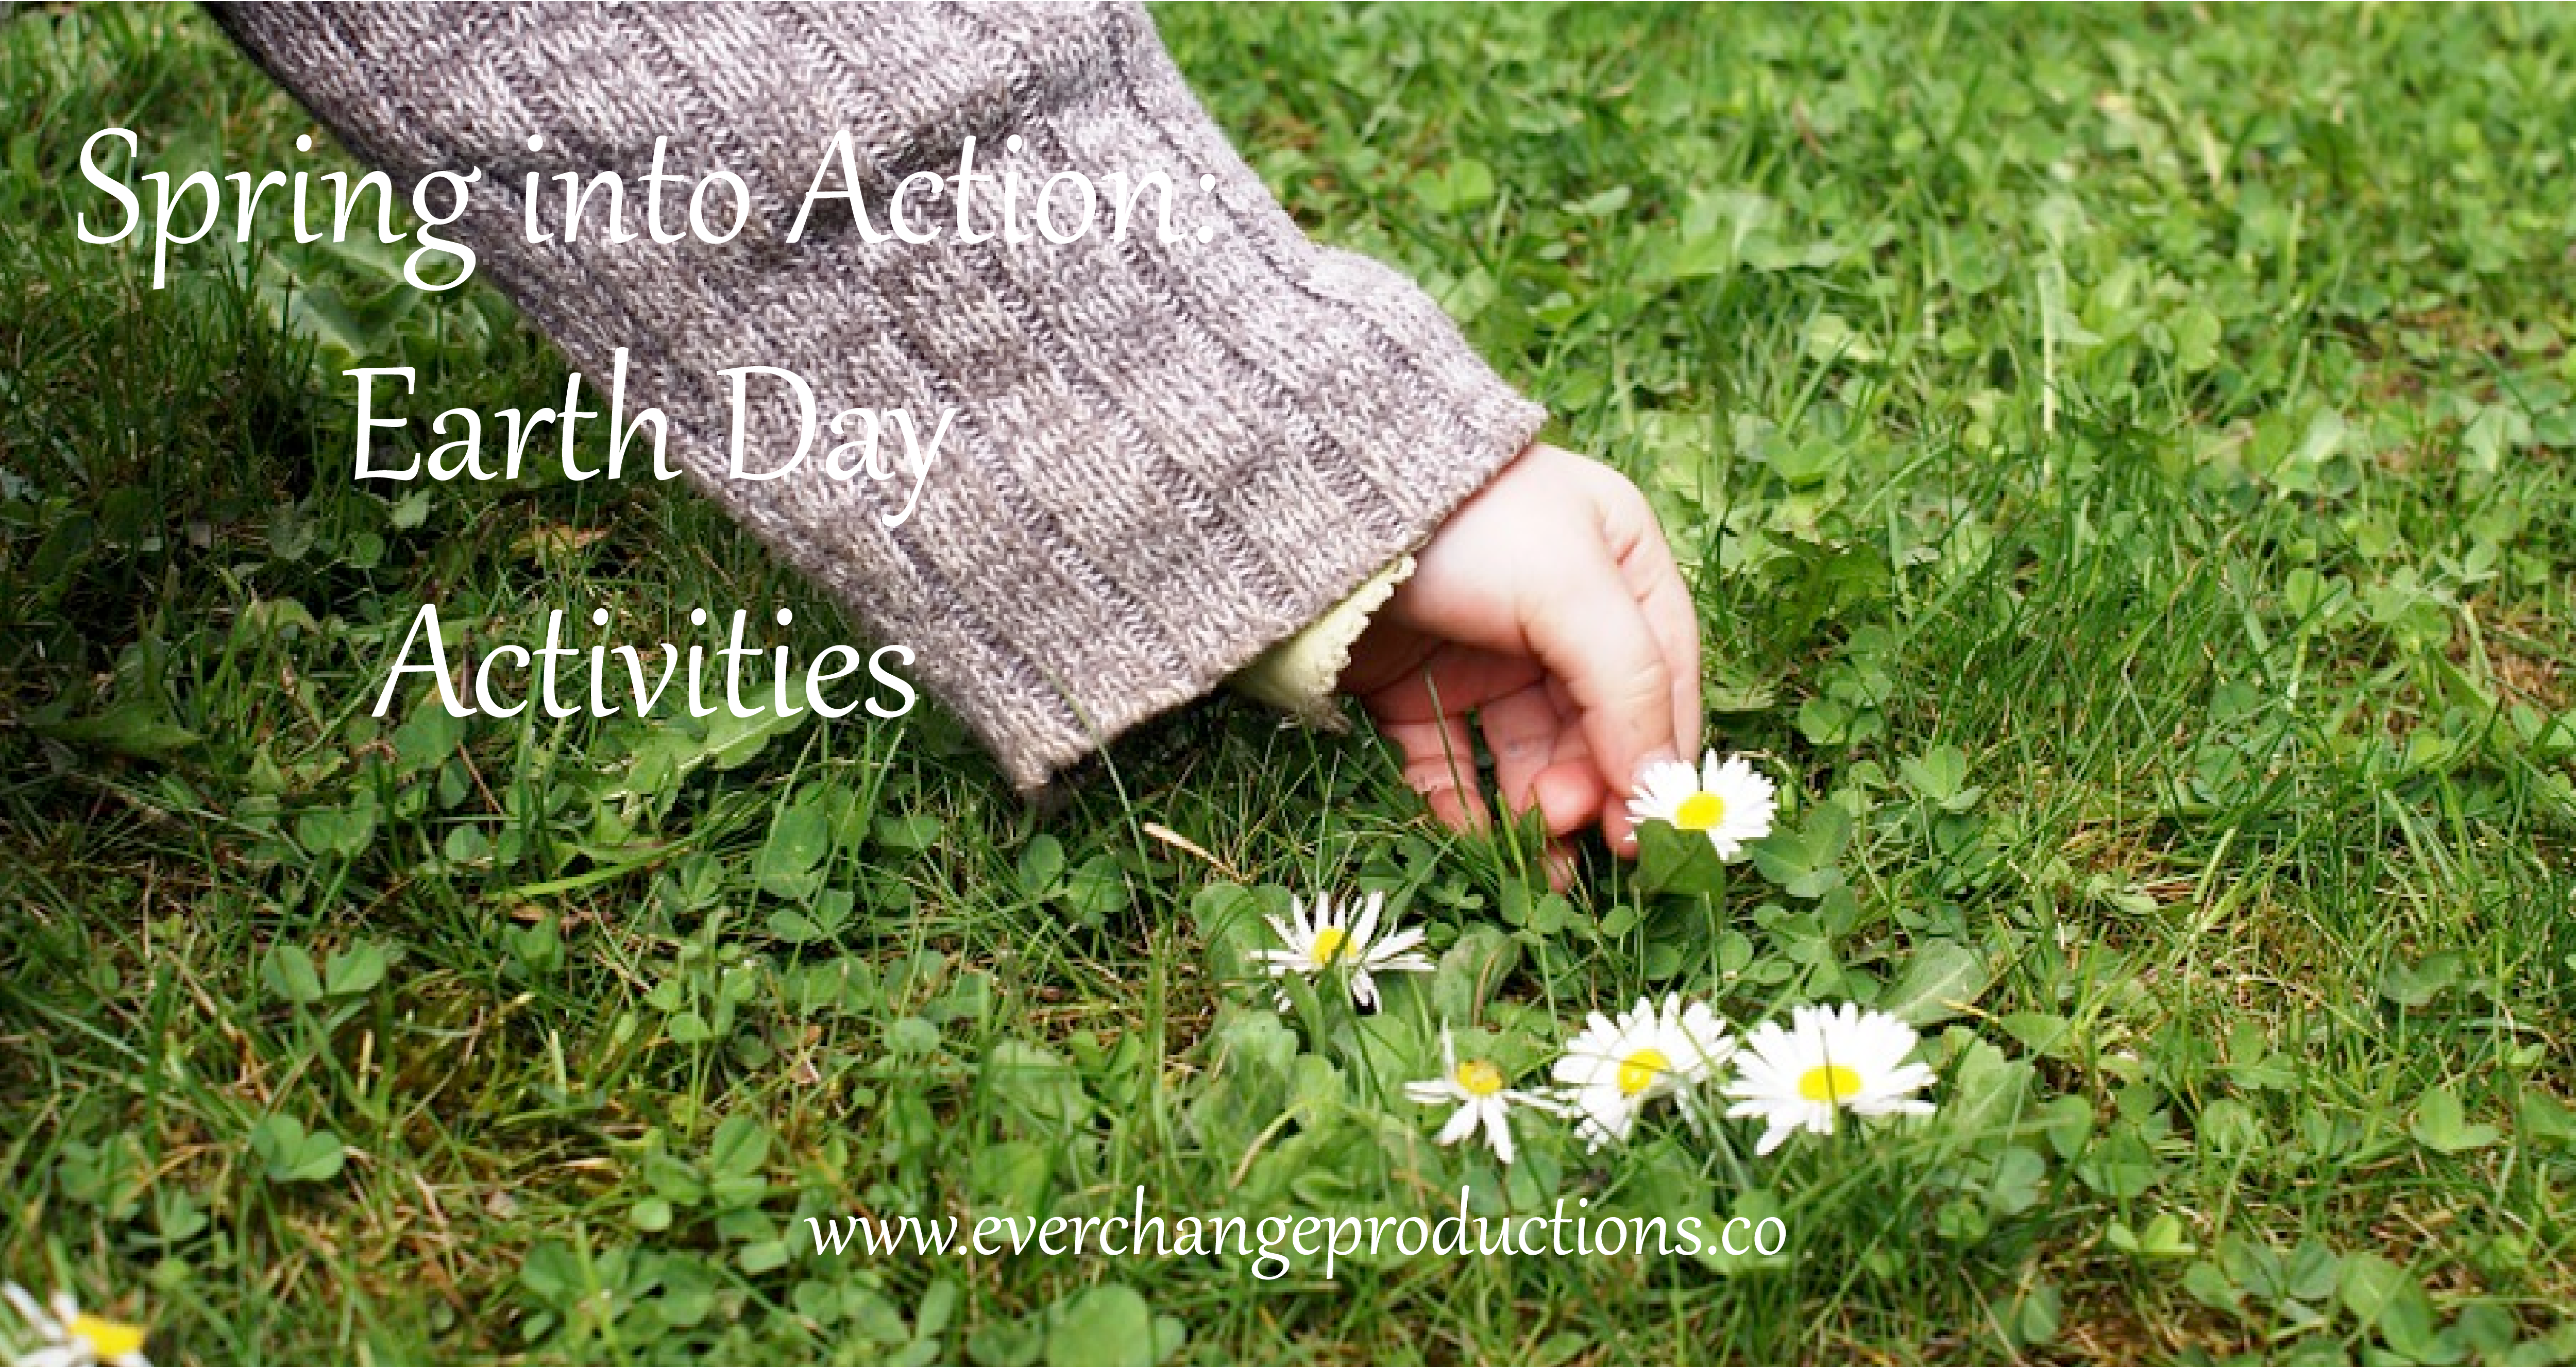 There is no shortage of ways to spring into action. Help celebrate and preserve our beautiful Earth with this list of Earth Day Activities.